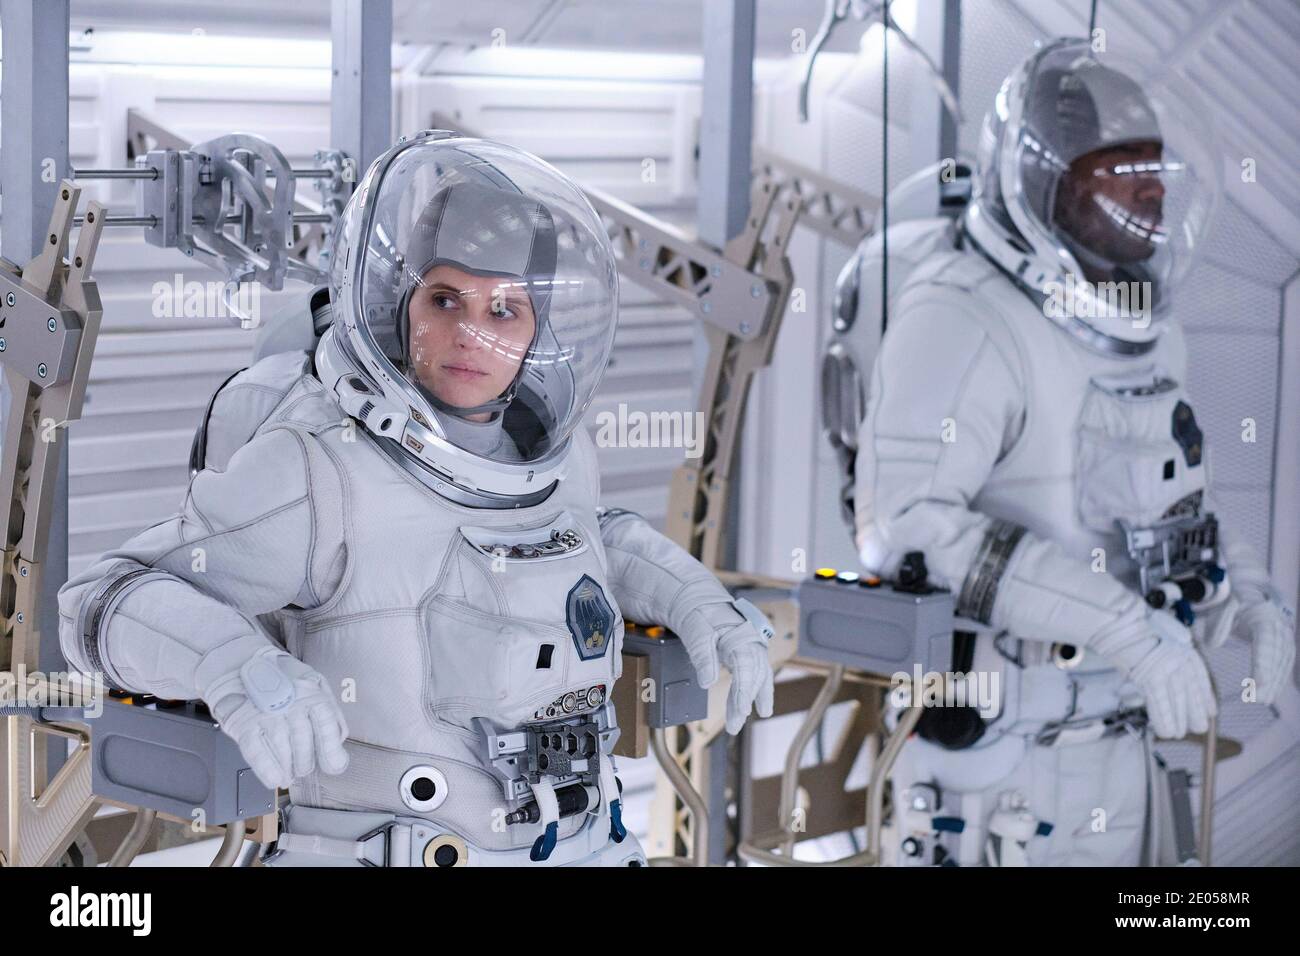 RELEASE DATE: TITLE: December 23, 2020 The Midnight Sky STUDIO: Netflix DIRECTOR: George Clooney PLOT: This post-apocalyptic tale follows Augustine, a lonely scientist in the Arctic, as he races to stop Sully and her fellow astronauts from returning home to a mysterious global catastrophe. STARRING: FELICITY JONES as Sully, DAVID OYELOWO as Adewole. (Credit Image: © Netflix/Entertainment Pictures) Stock Photo